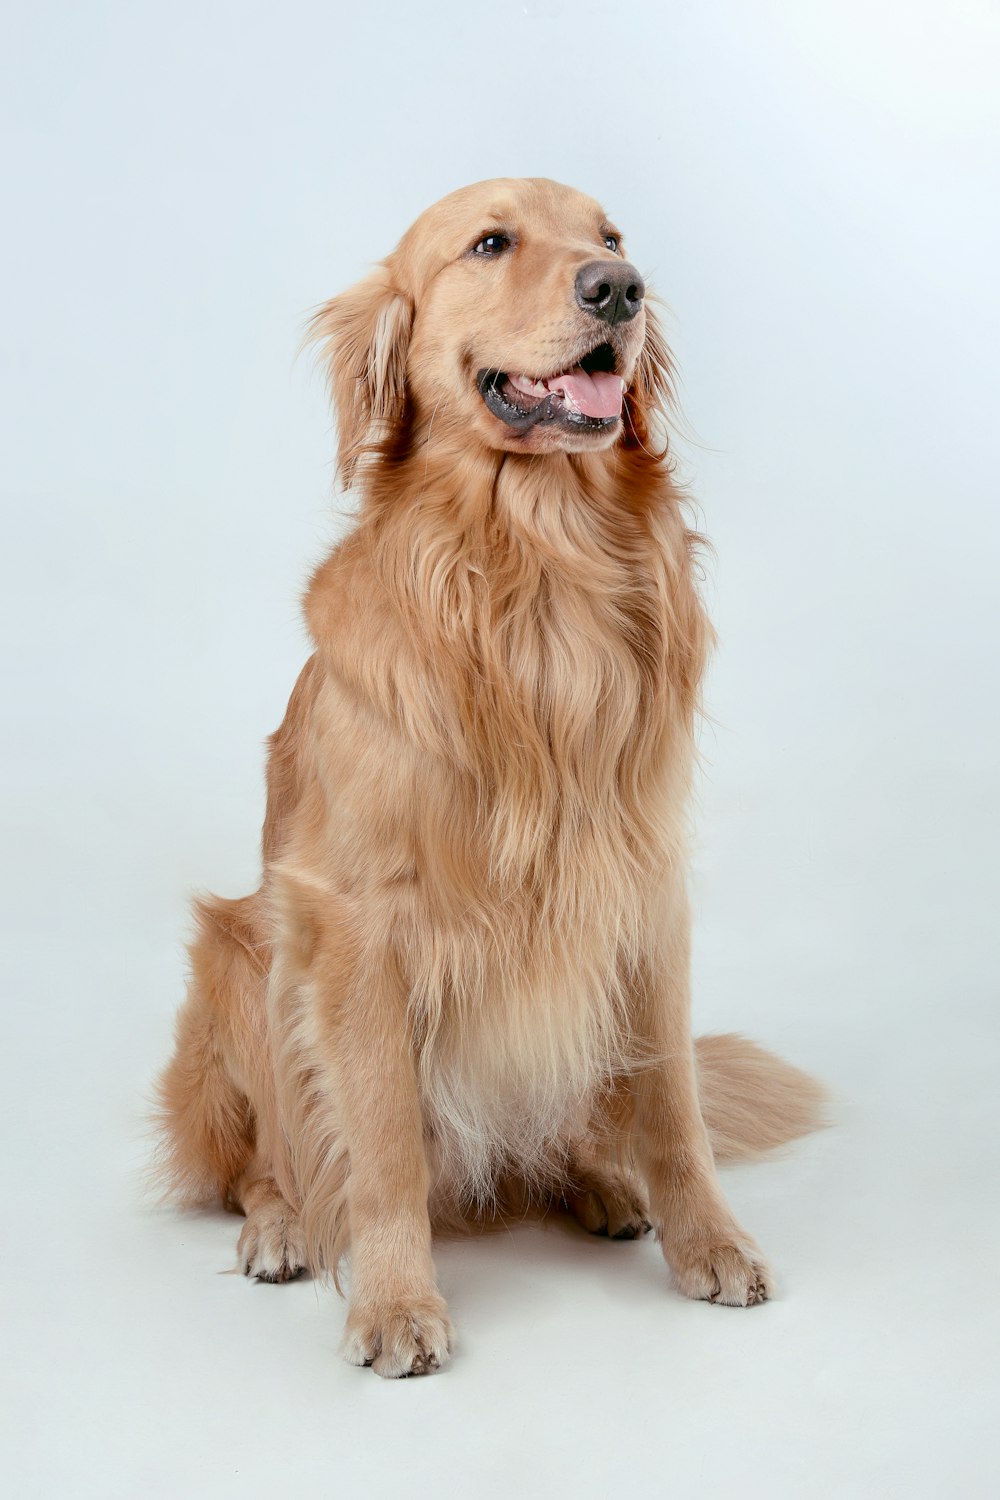 a golden retriever is sitting and smiling for the camera